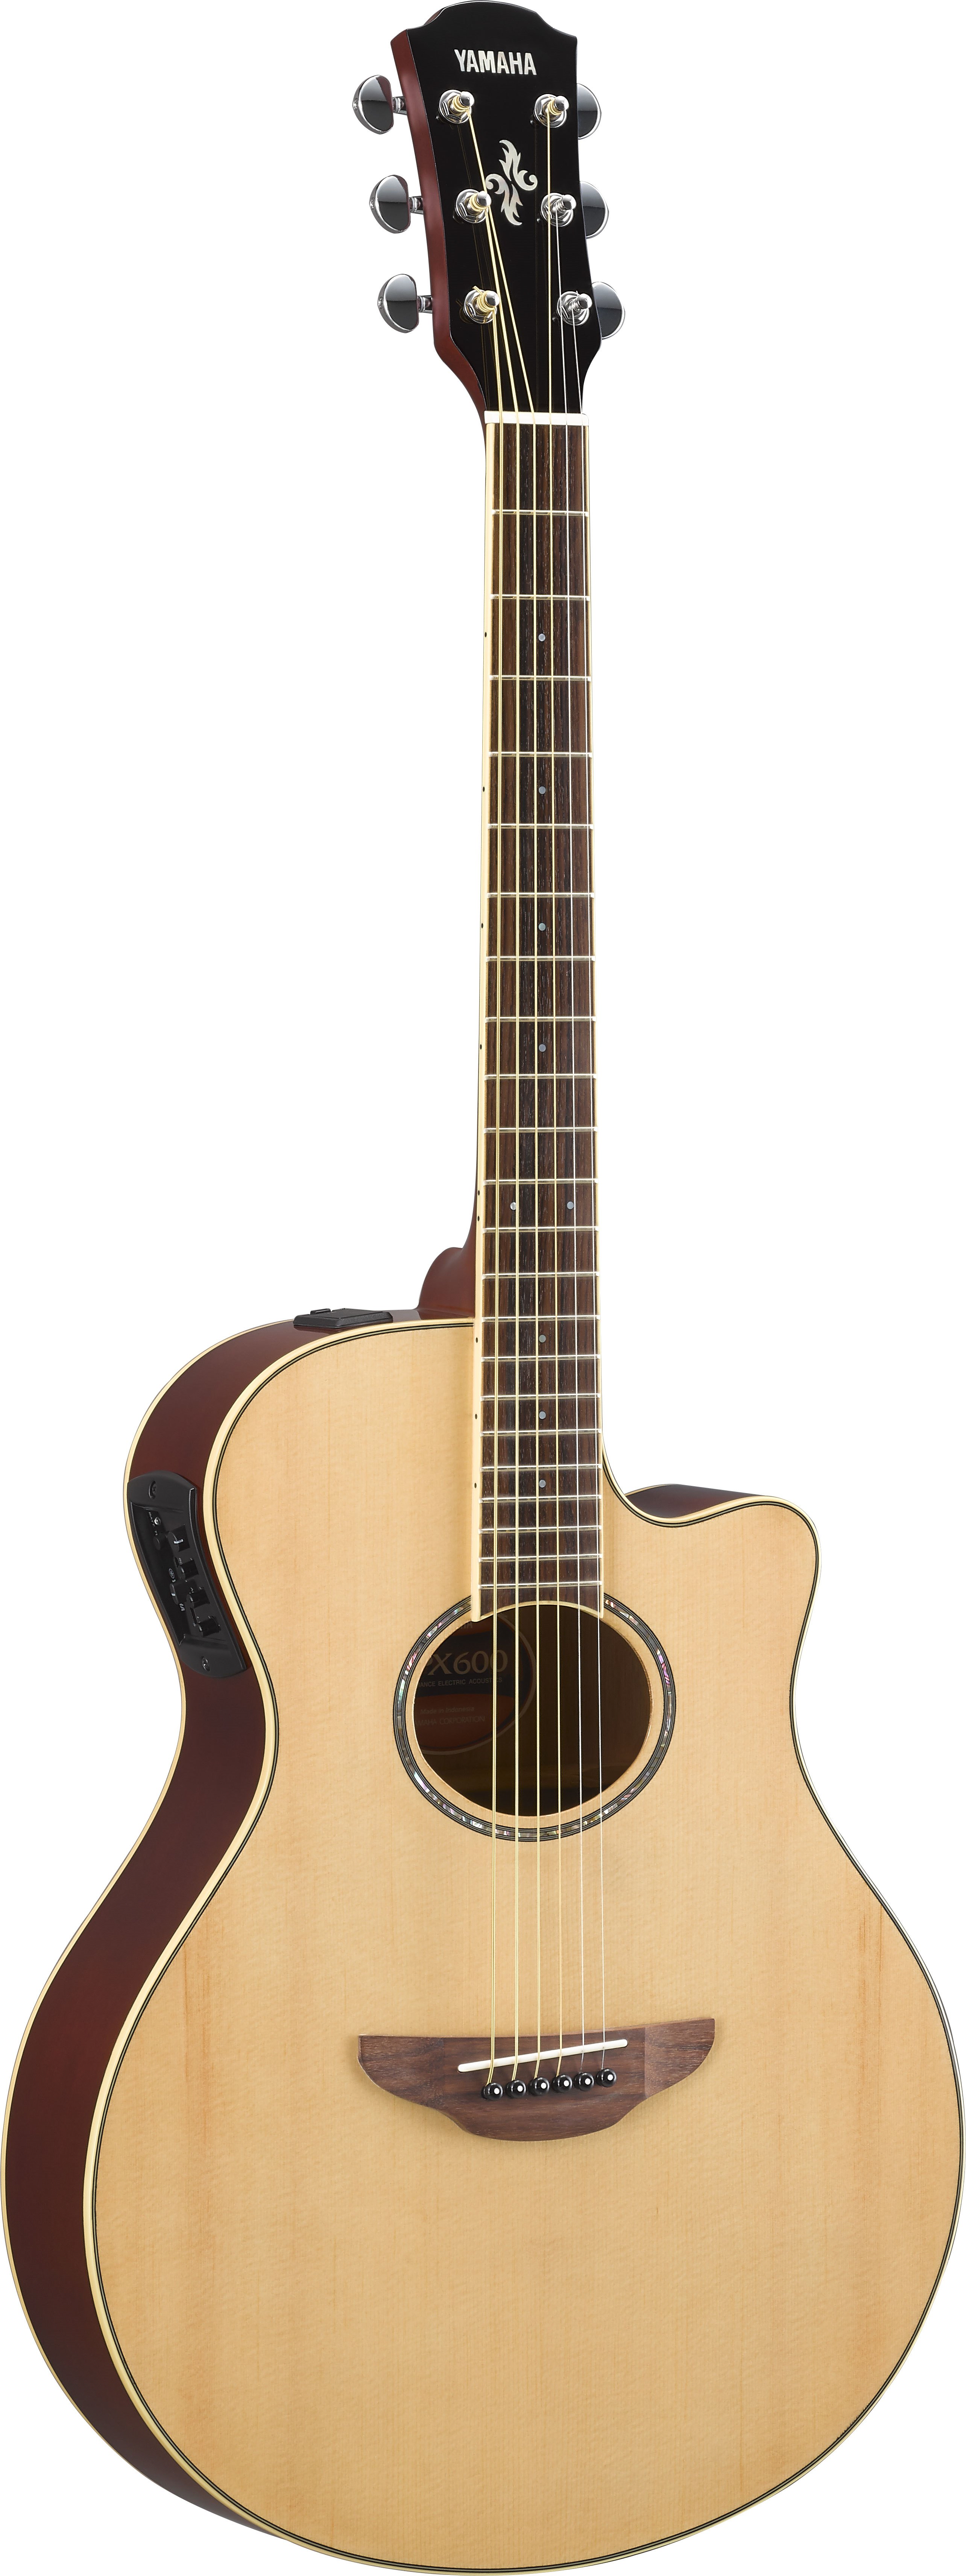 APX - Overview - Acoustic Guitars - Guitars, Basses & Amps - Musical  Instruments - Products - Yamaha - Canada - English